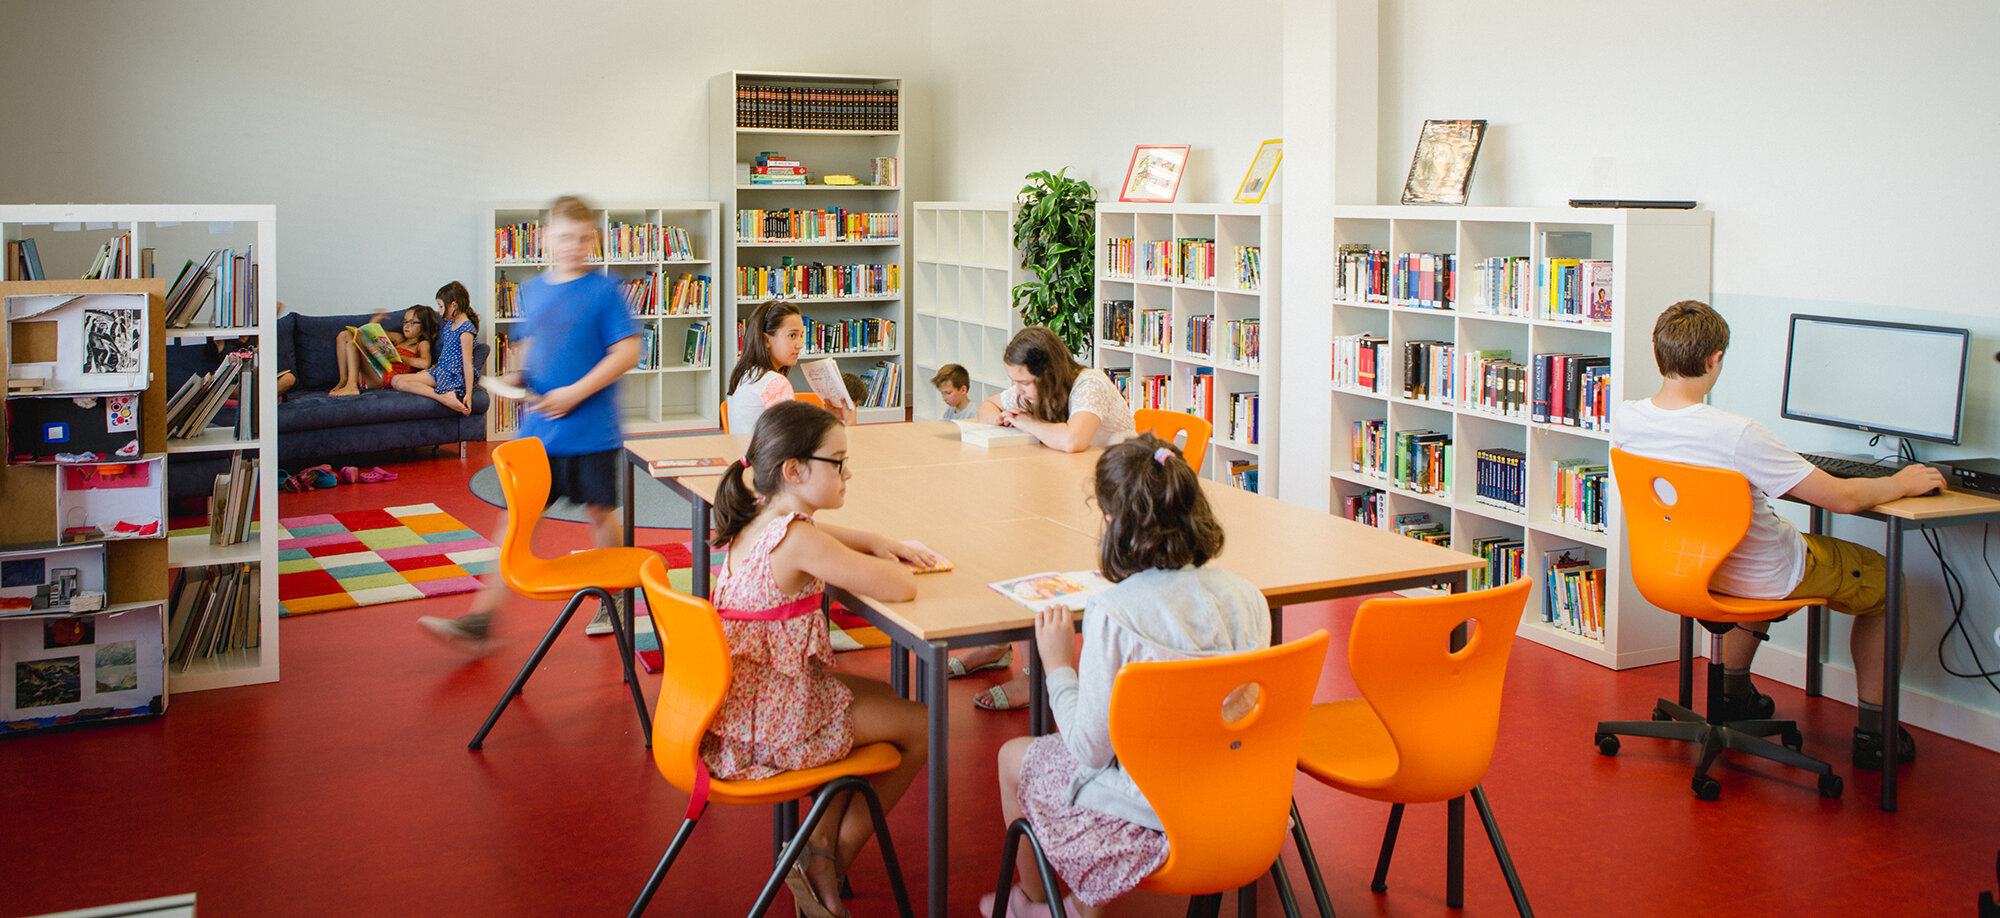 View of the school library. Children are reading, picking up books or sitting at the computer.